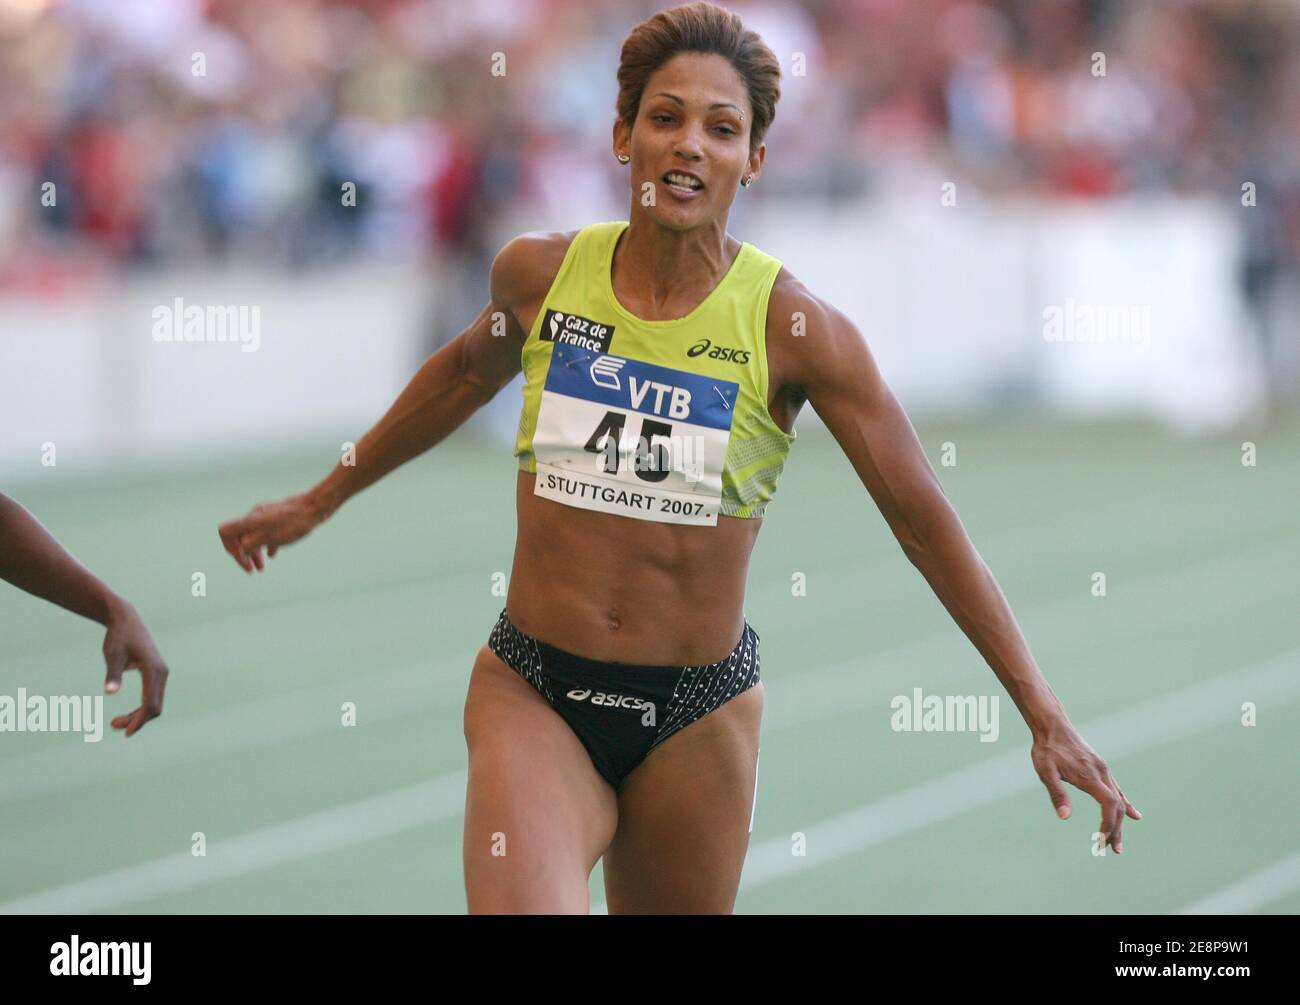 France's Christine Arron competes in the women's 100 meters at the IAAF 5th World Athletics Final 2007 in Stuttgart, Germany on September 22, 2007. Photo by Gladys Chai von der Laage/Cameleon/ABACAPRESS.COM Stock Photo